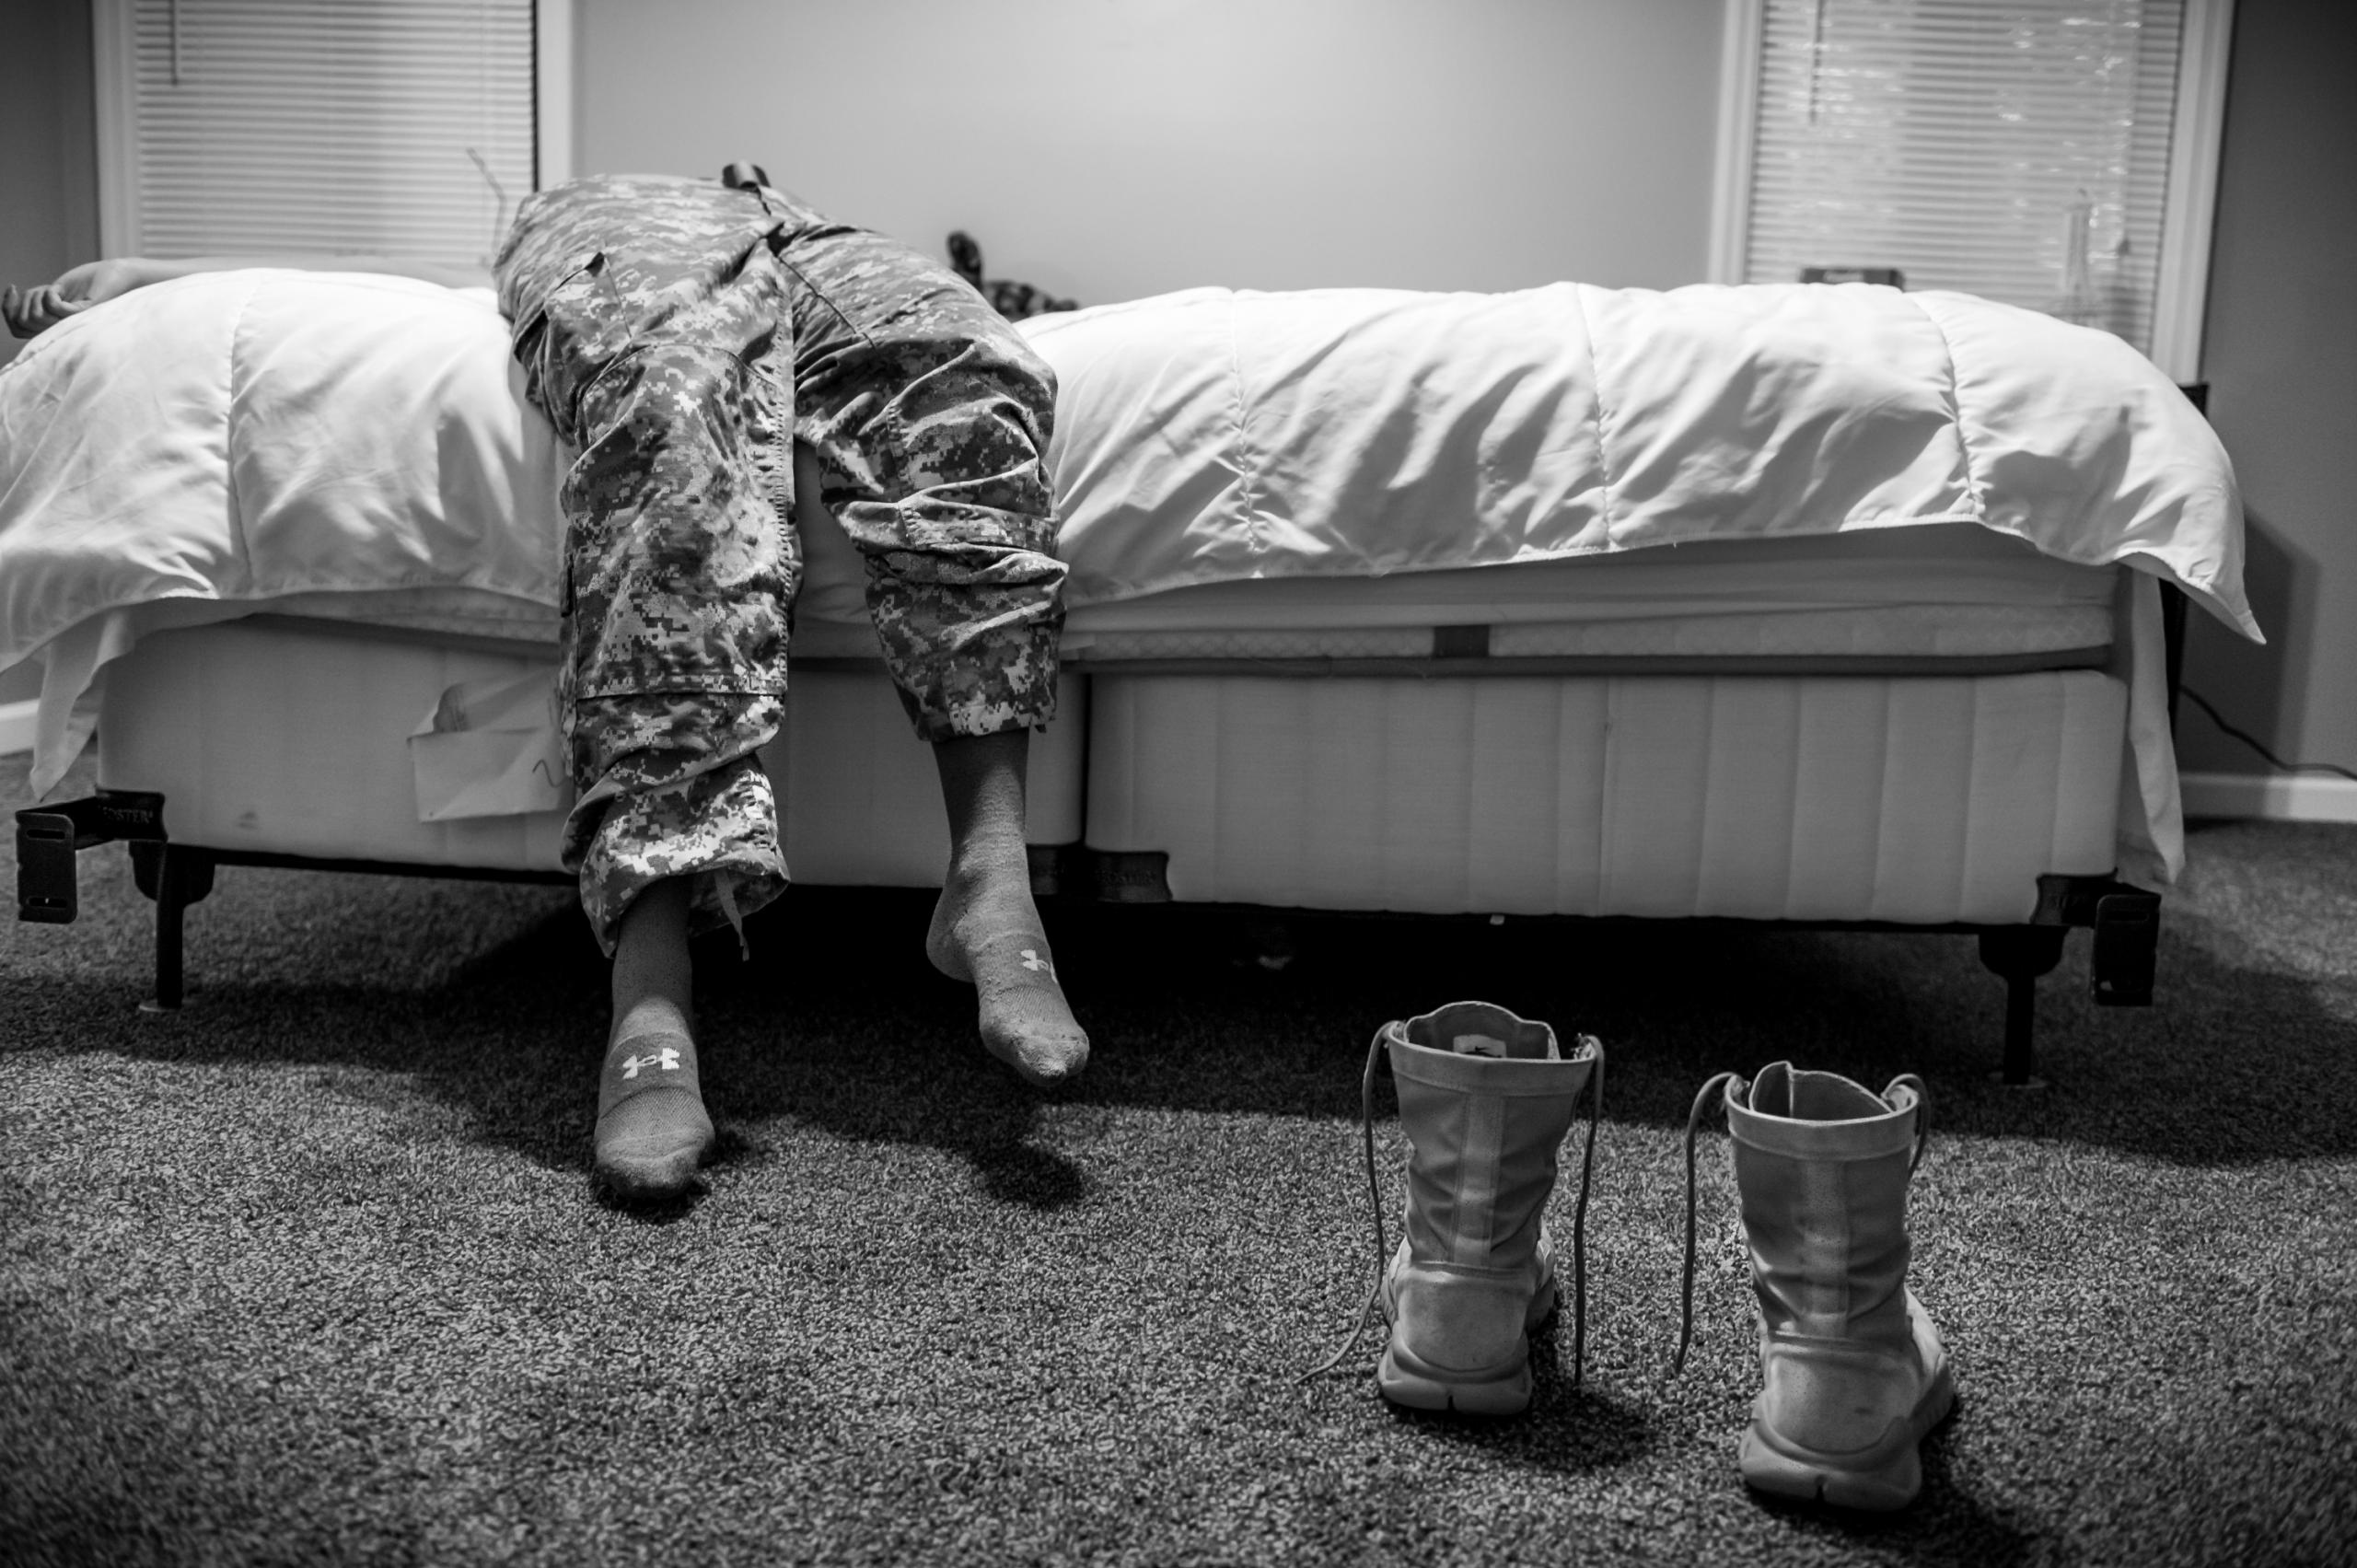 Sexual Assault in America's Military